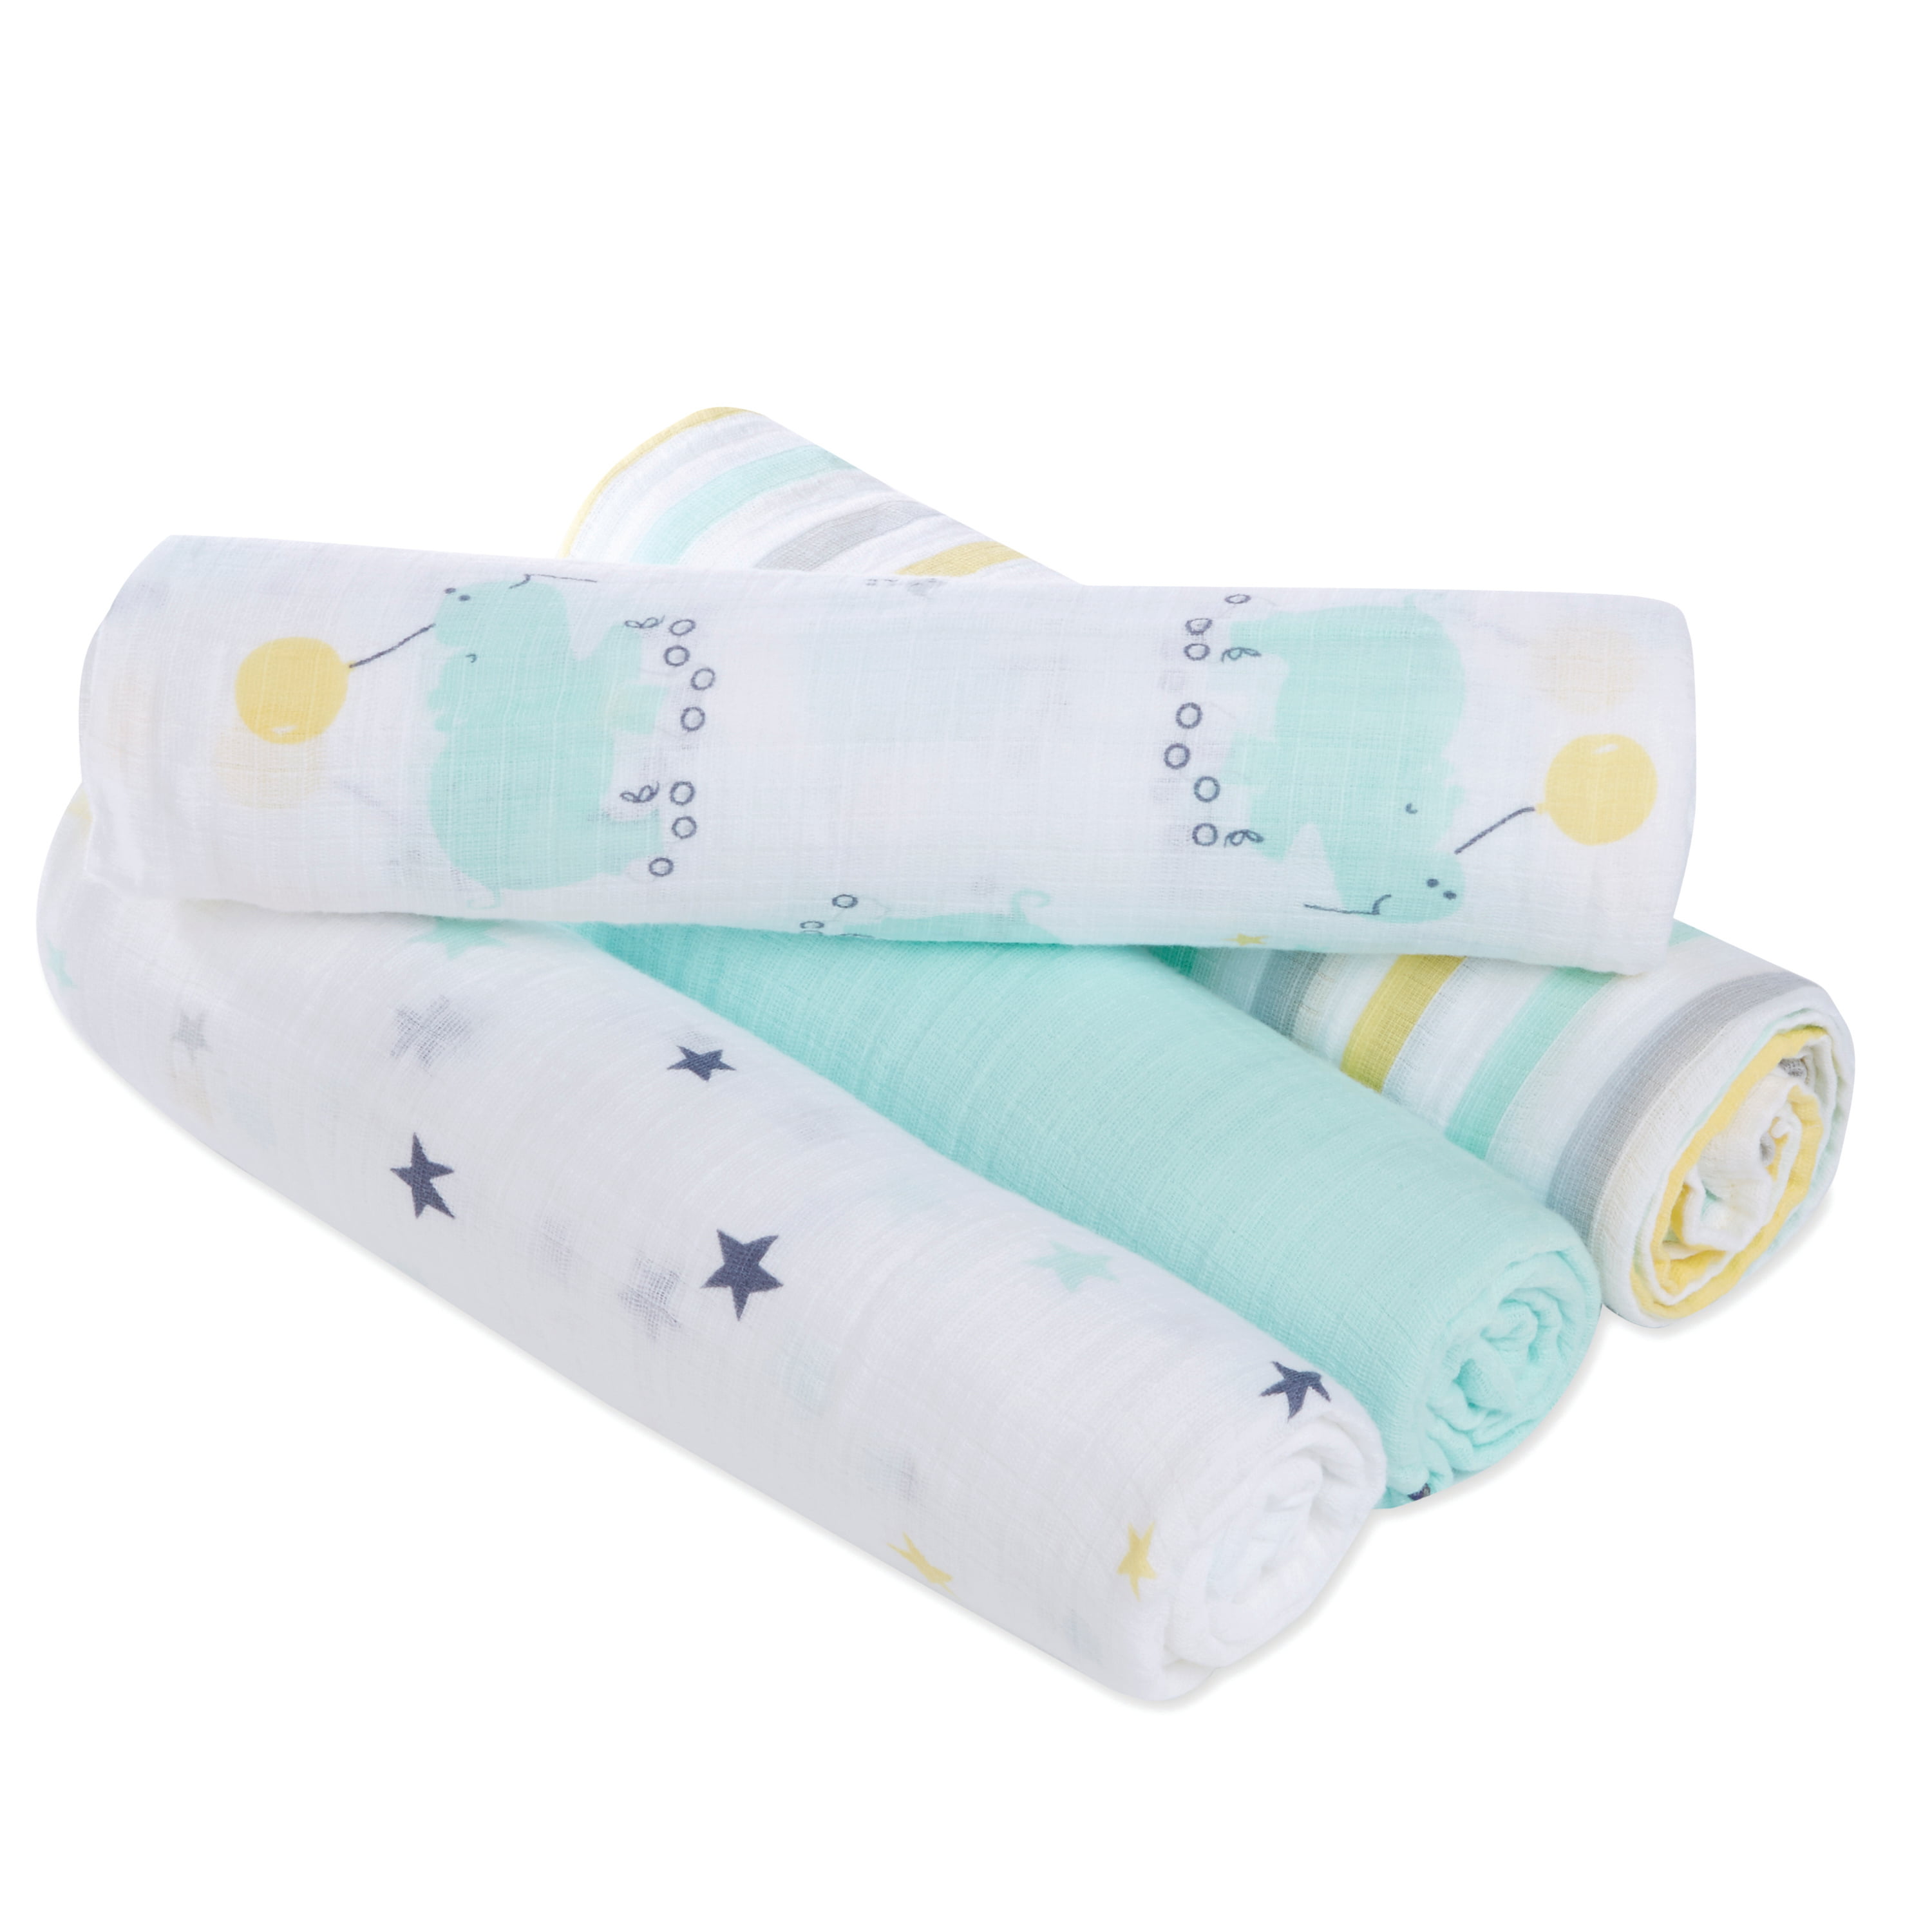 Aden by Aden Anais Baby Boy Swaddle Blanket  ~ You choose ~ 44" x 44" 